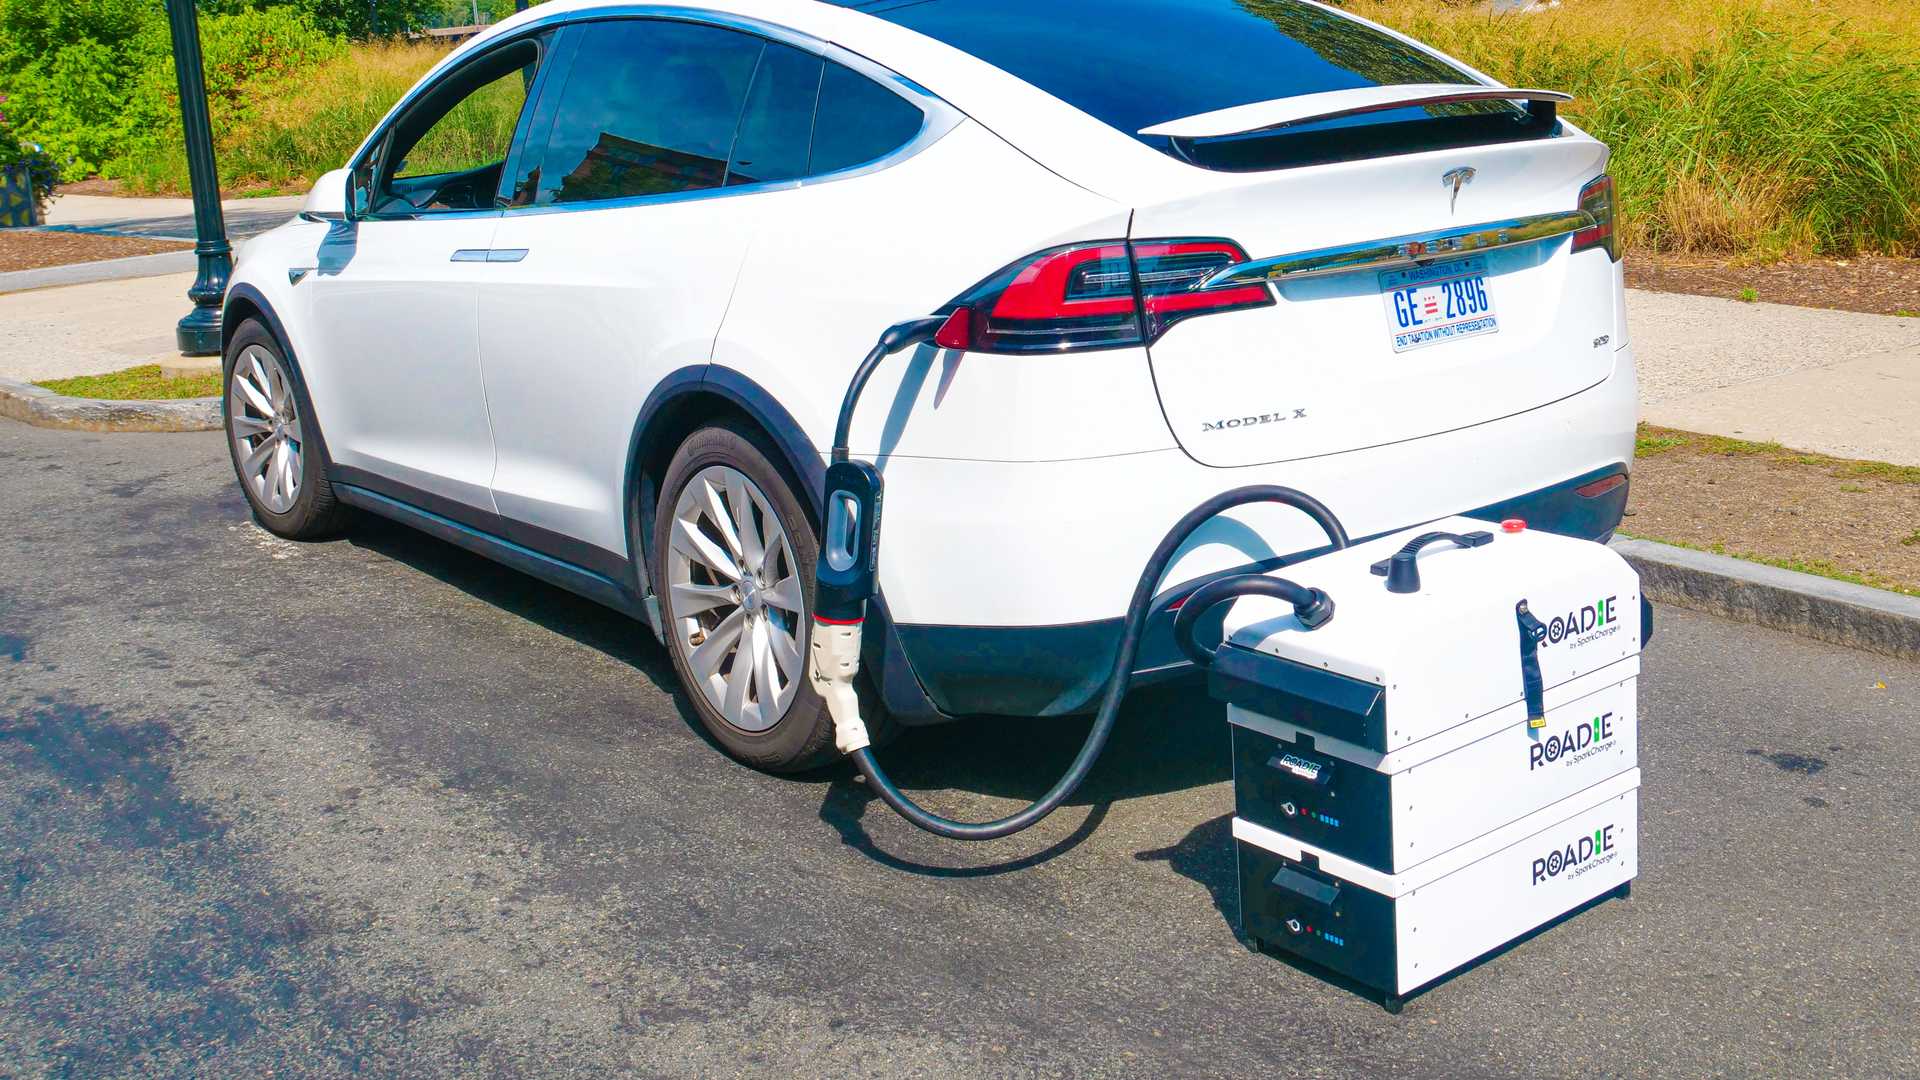 Portable electric vehicle charger expected soon.